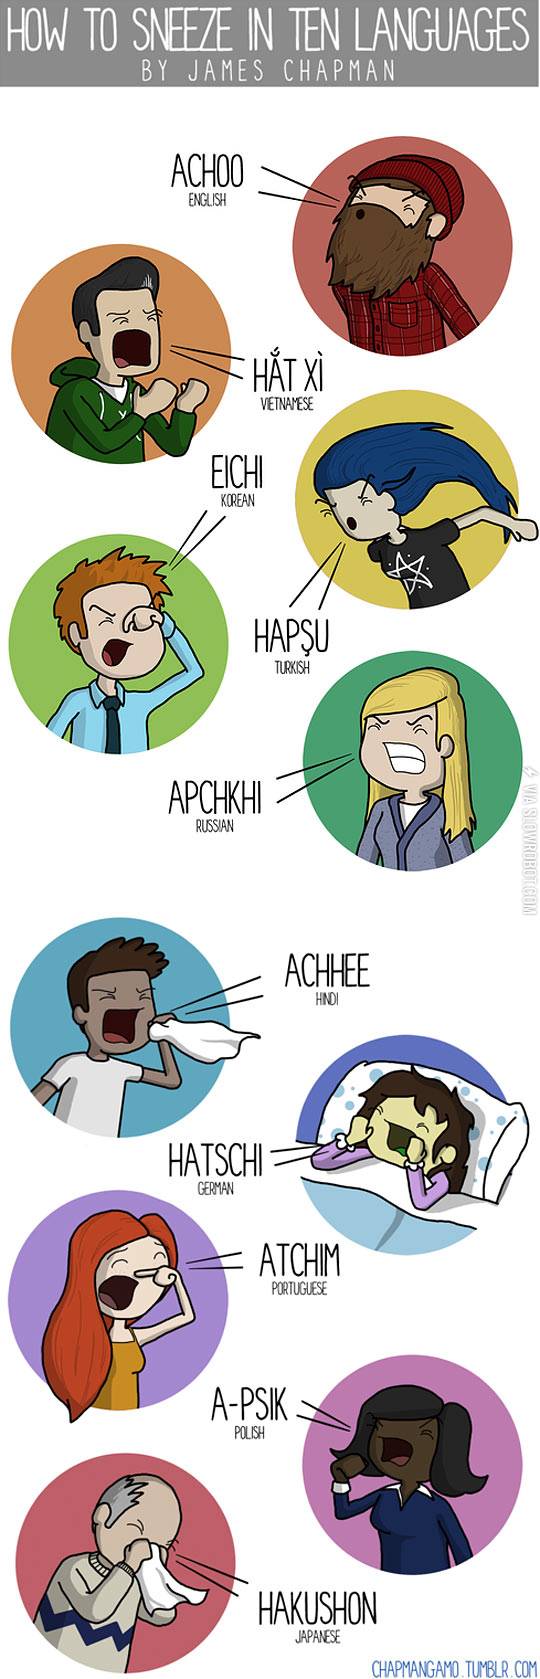 How+to+sneeze+in+10+languages.